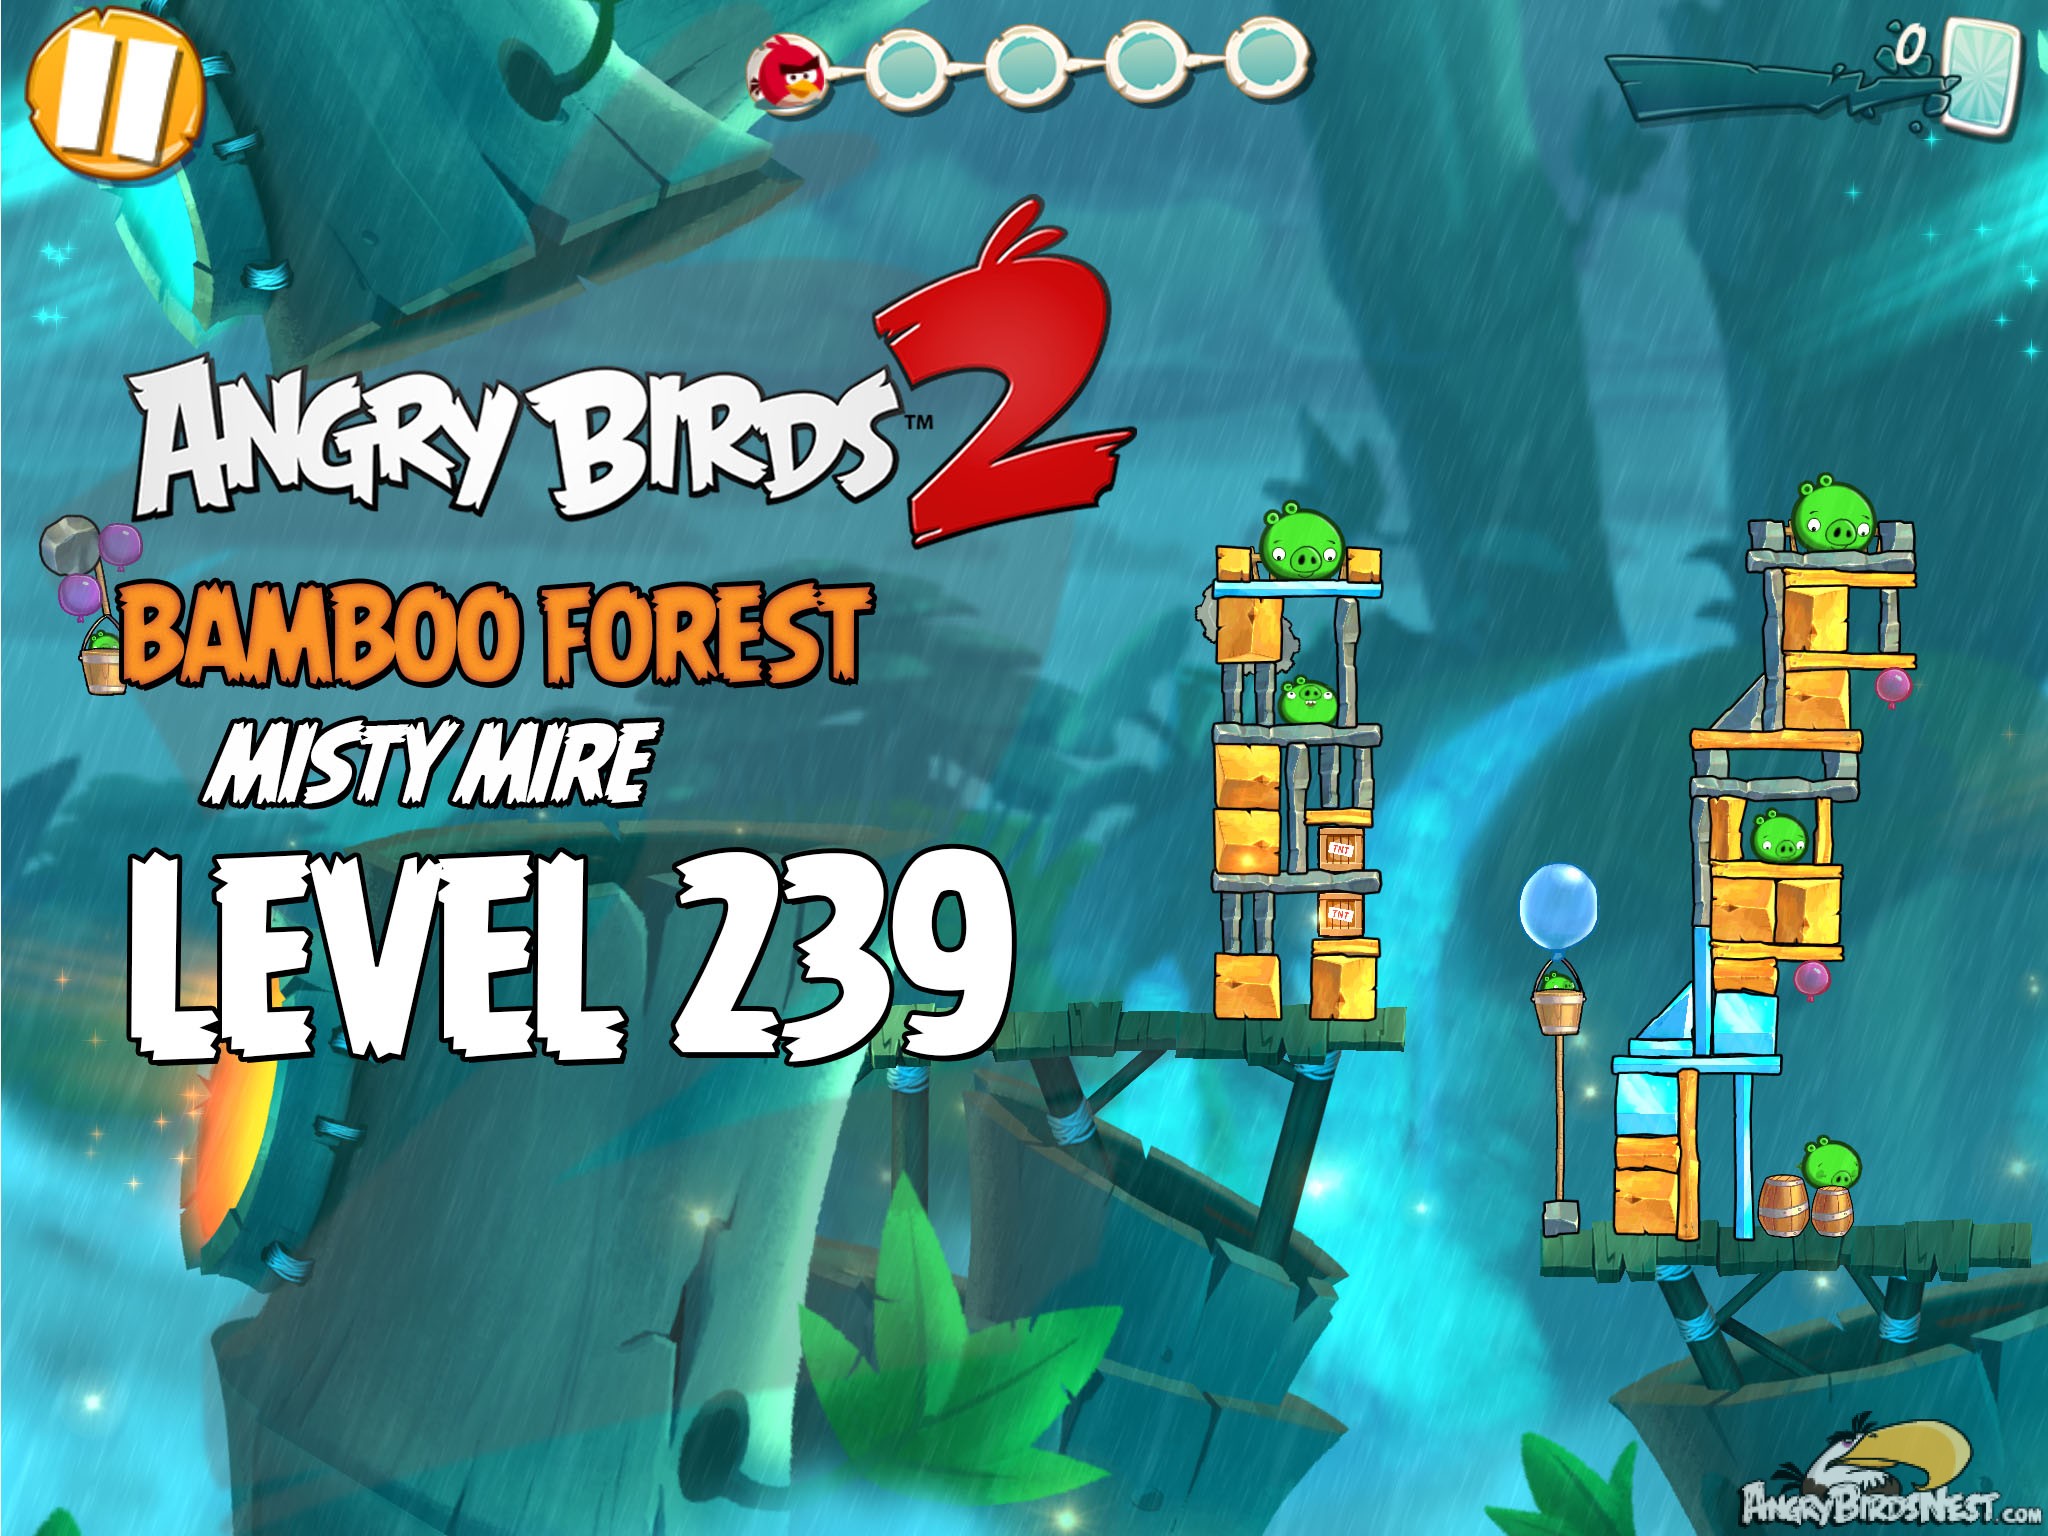 Angry Birds 2 Bamboo Forest Misty Mire Level 239